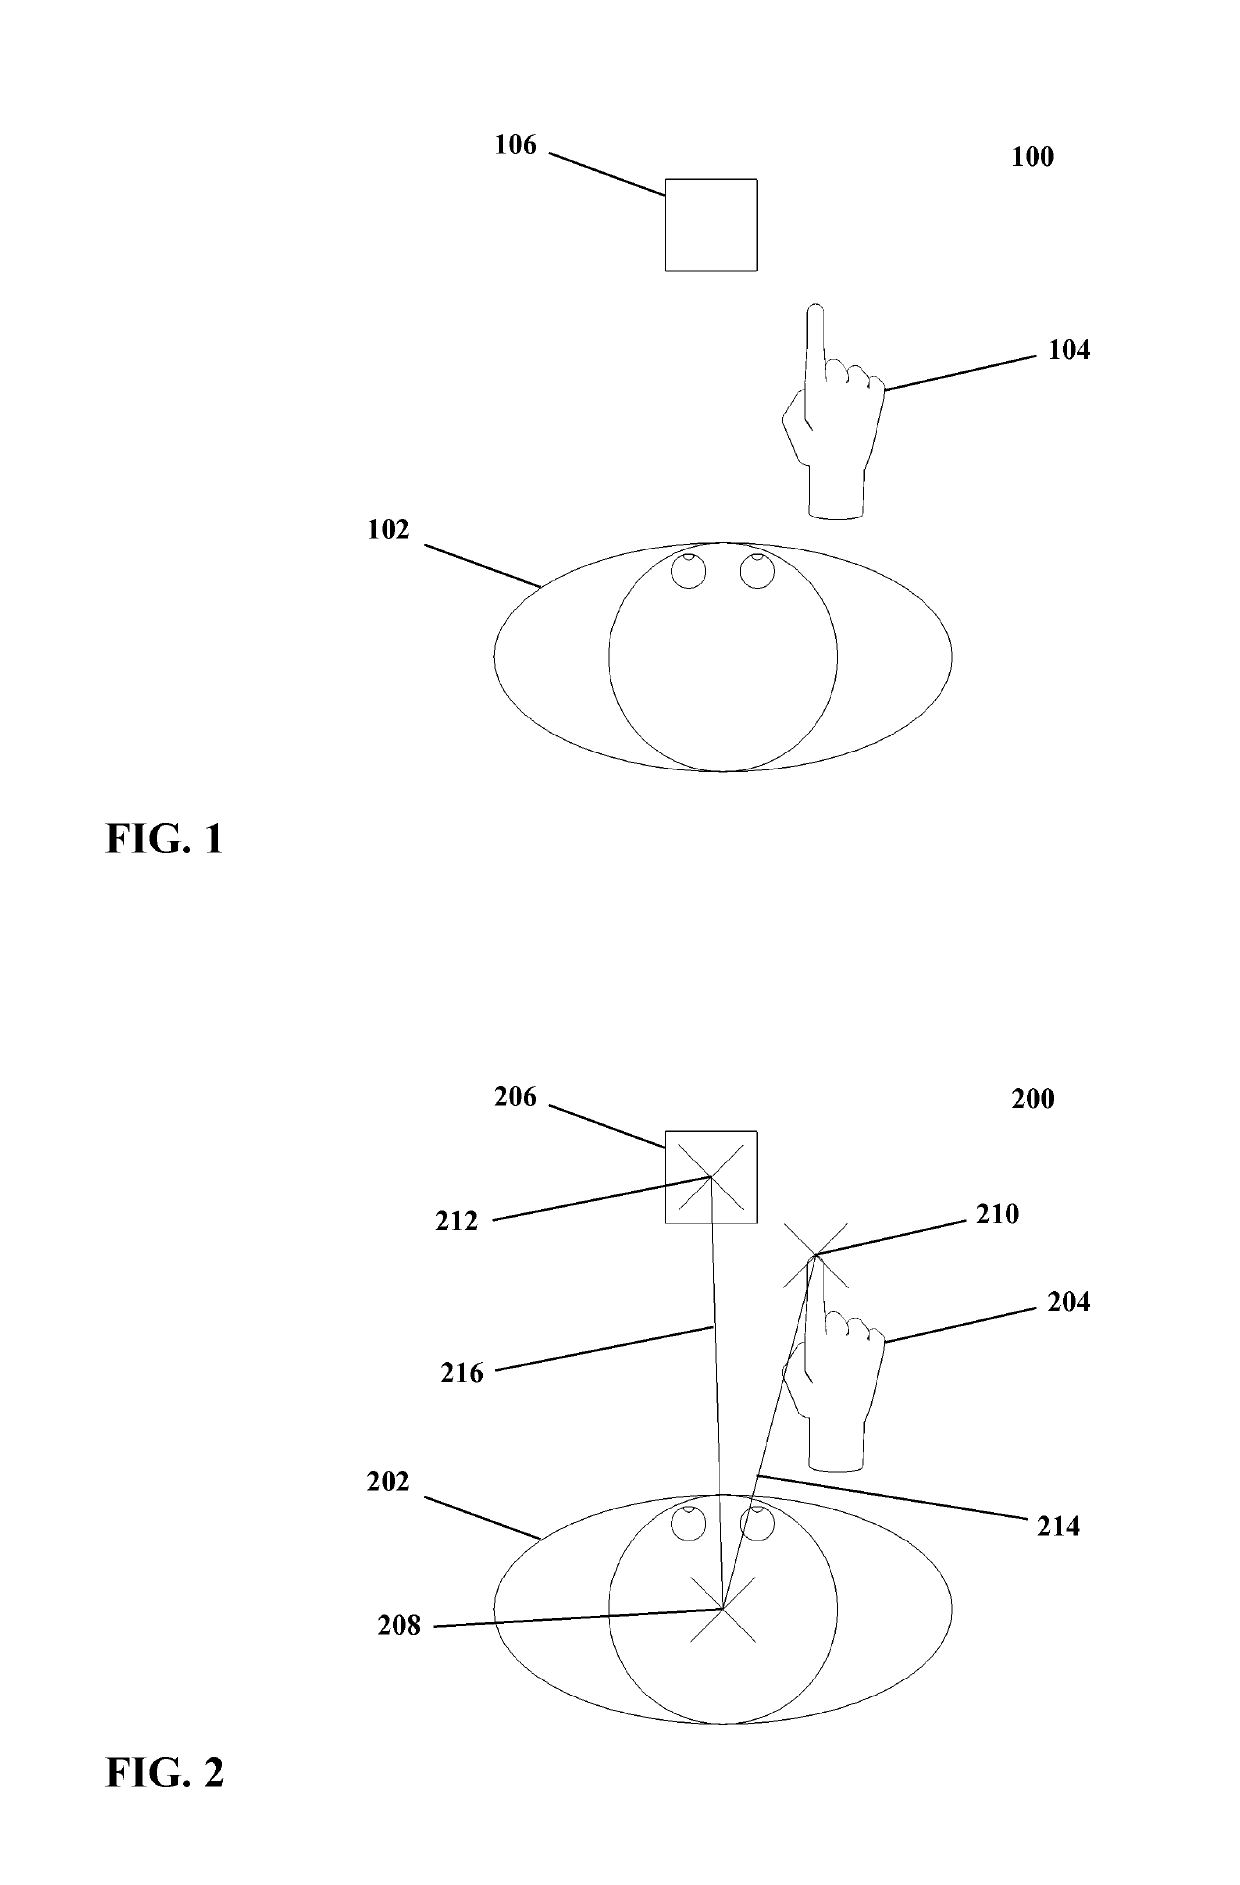 Method and apparatus for addressing obstruction in an interface